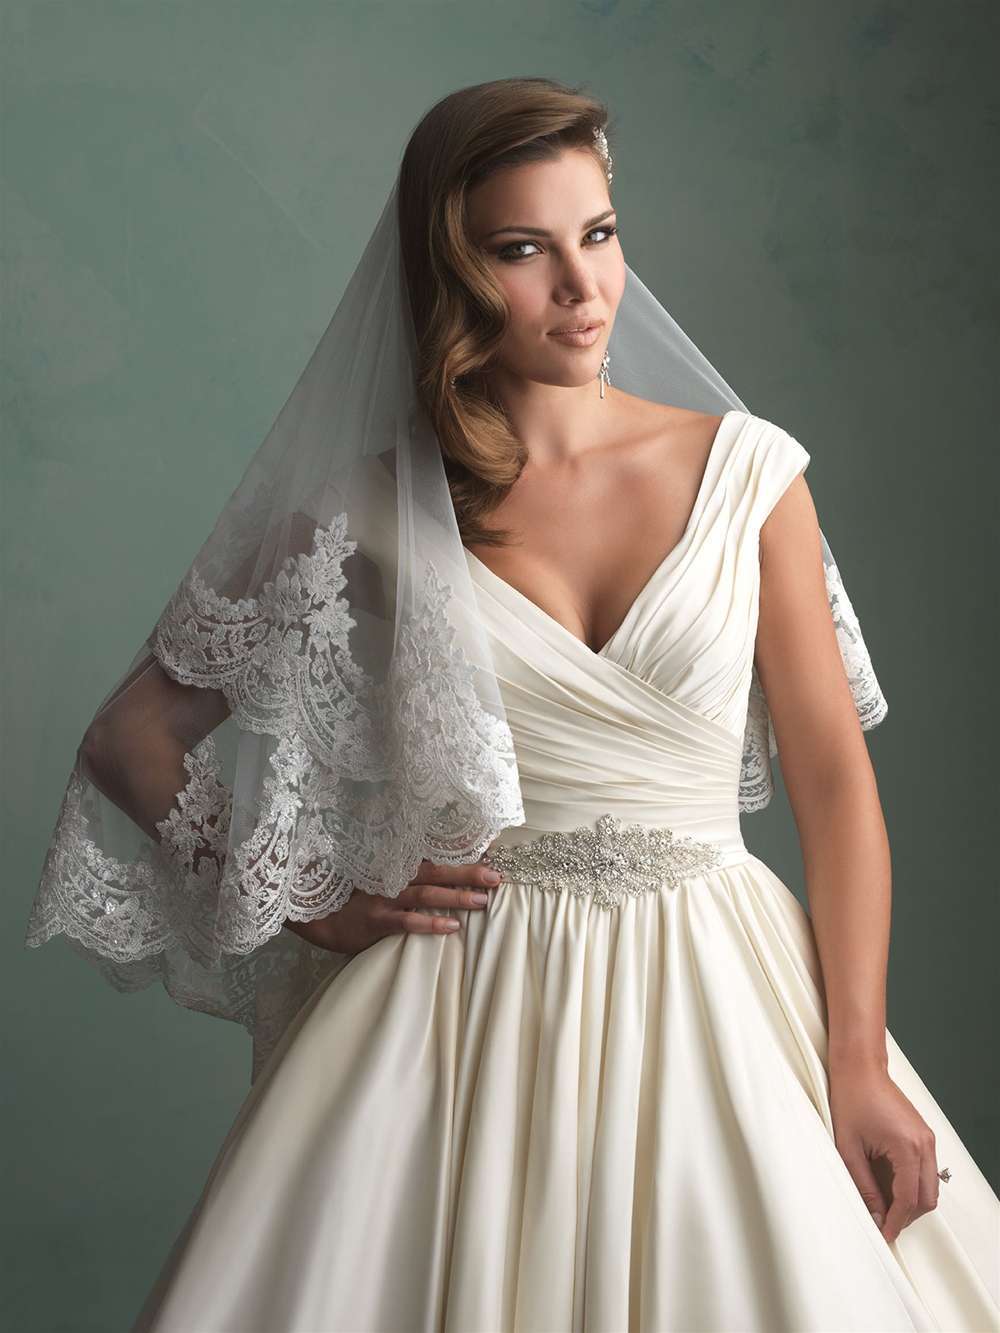 Velo in pizzo francese Allure Bridals